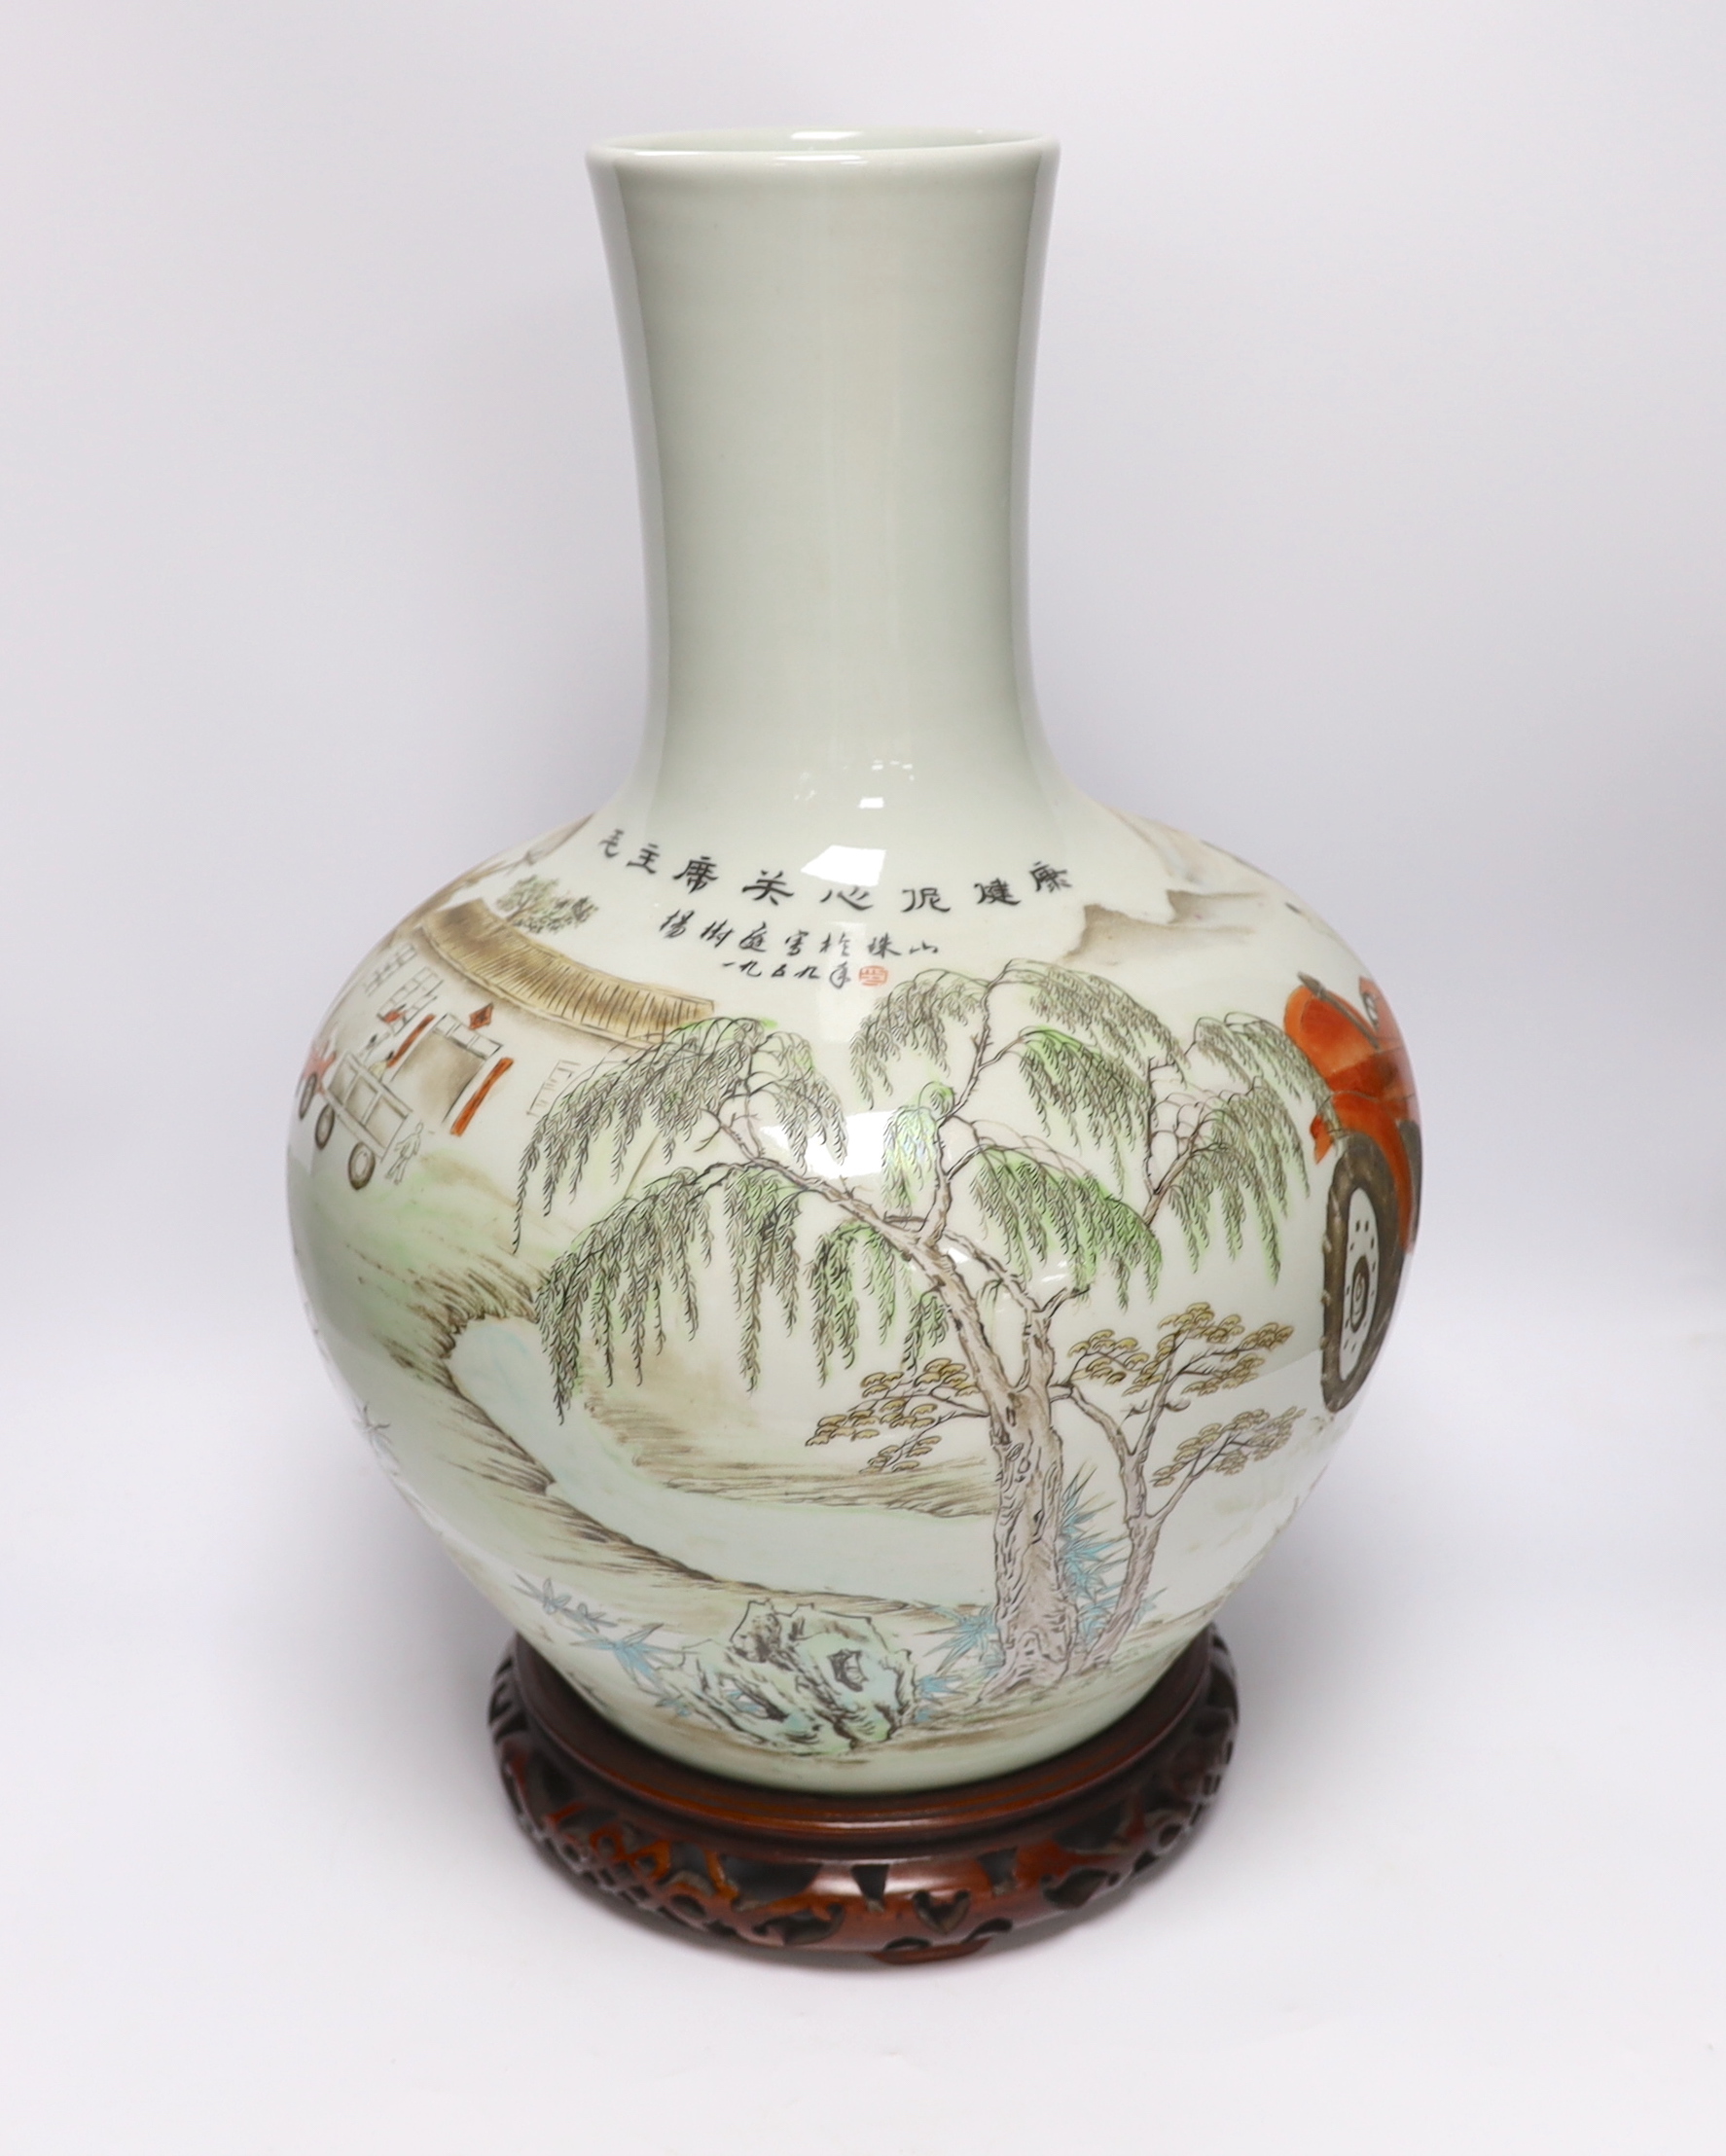 A Chinese Cultural Revolution style enamelled porcelain vase on stand, 50cm high including stand - Image 2 of 5